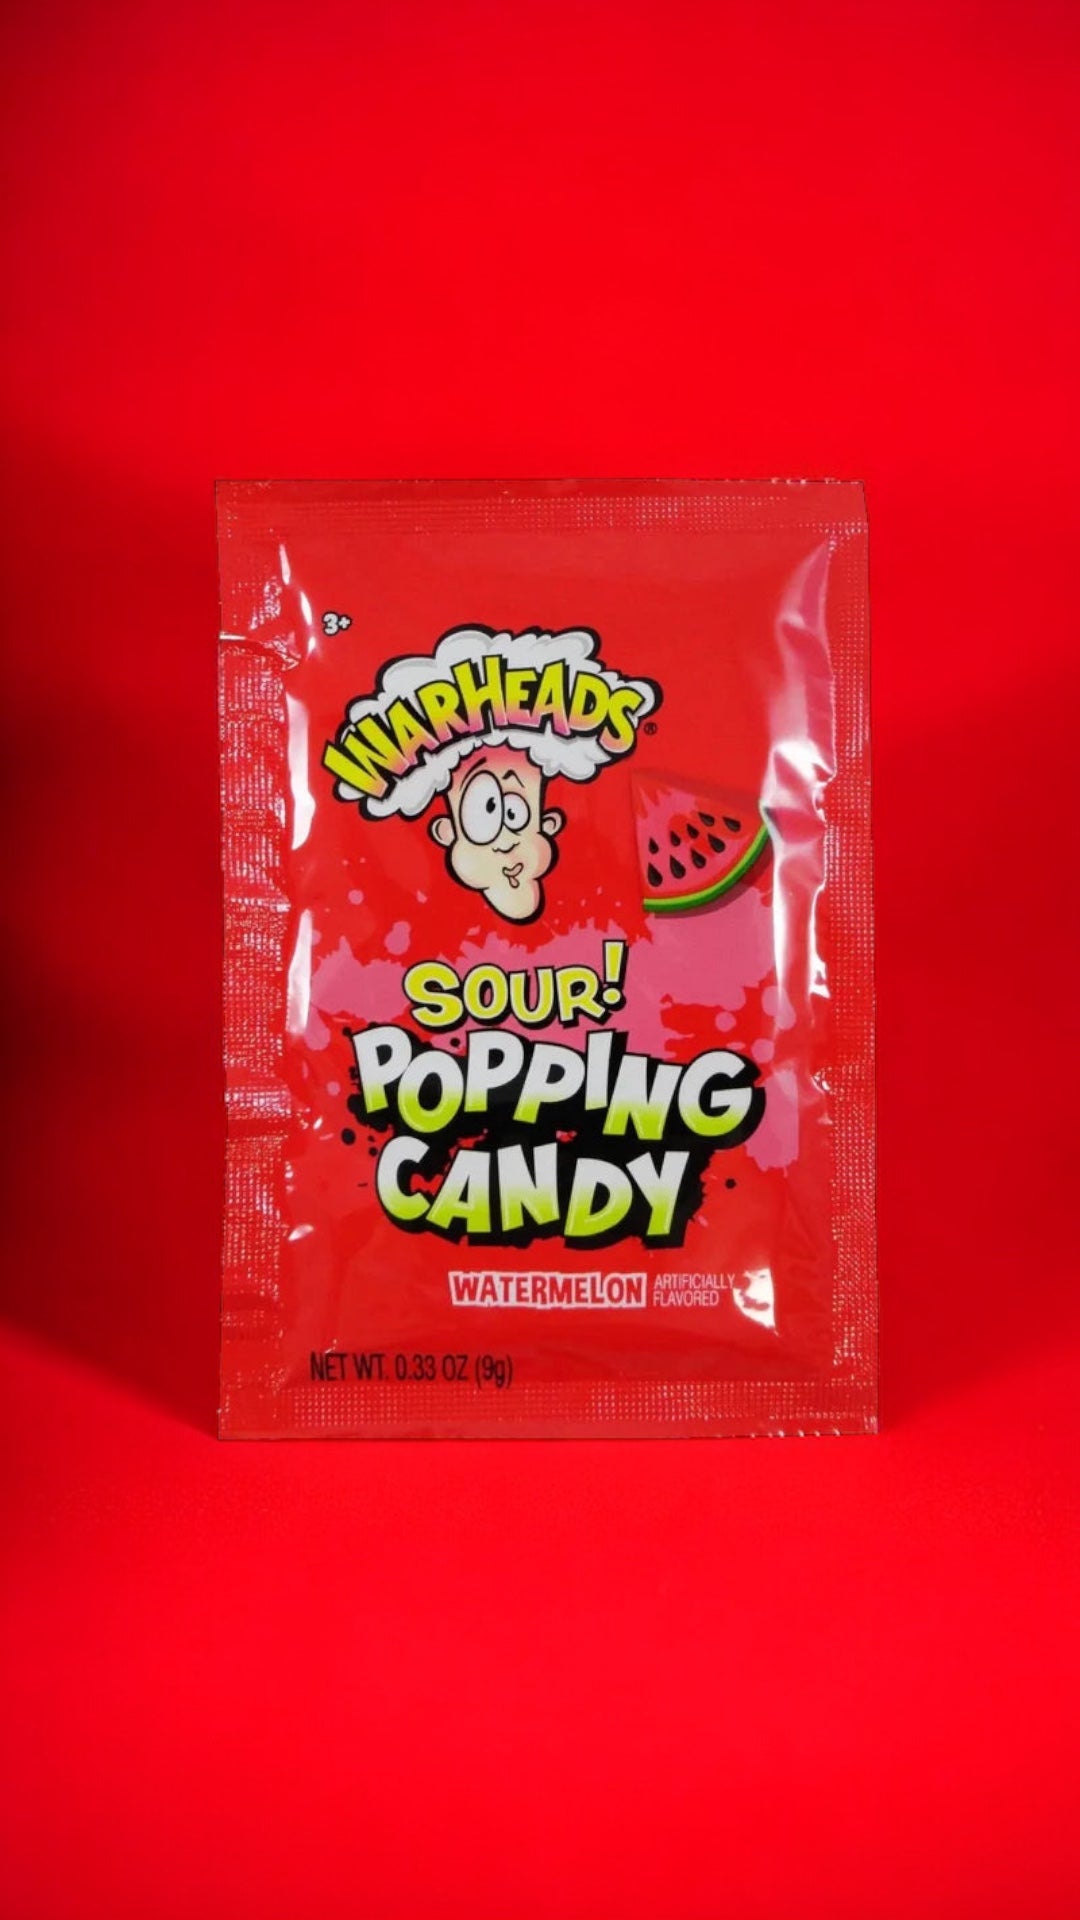 Warheads popping candy